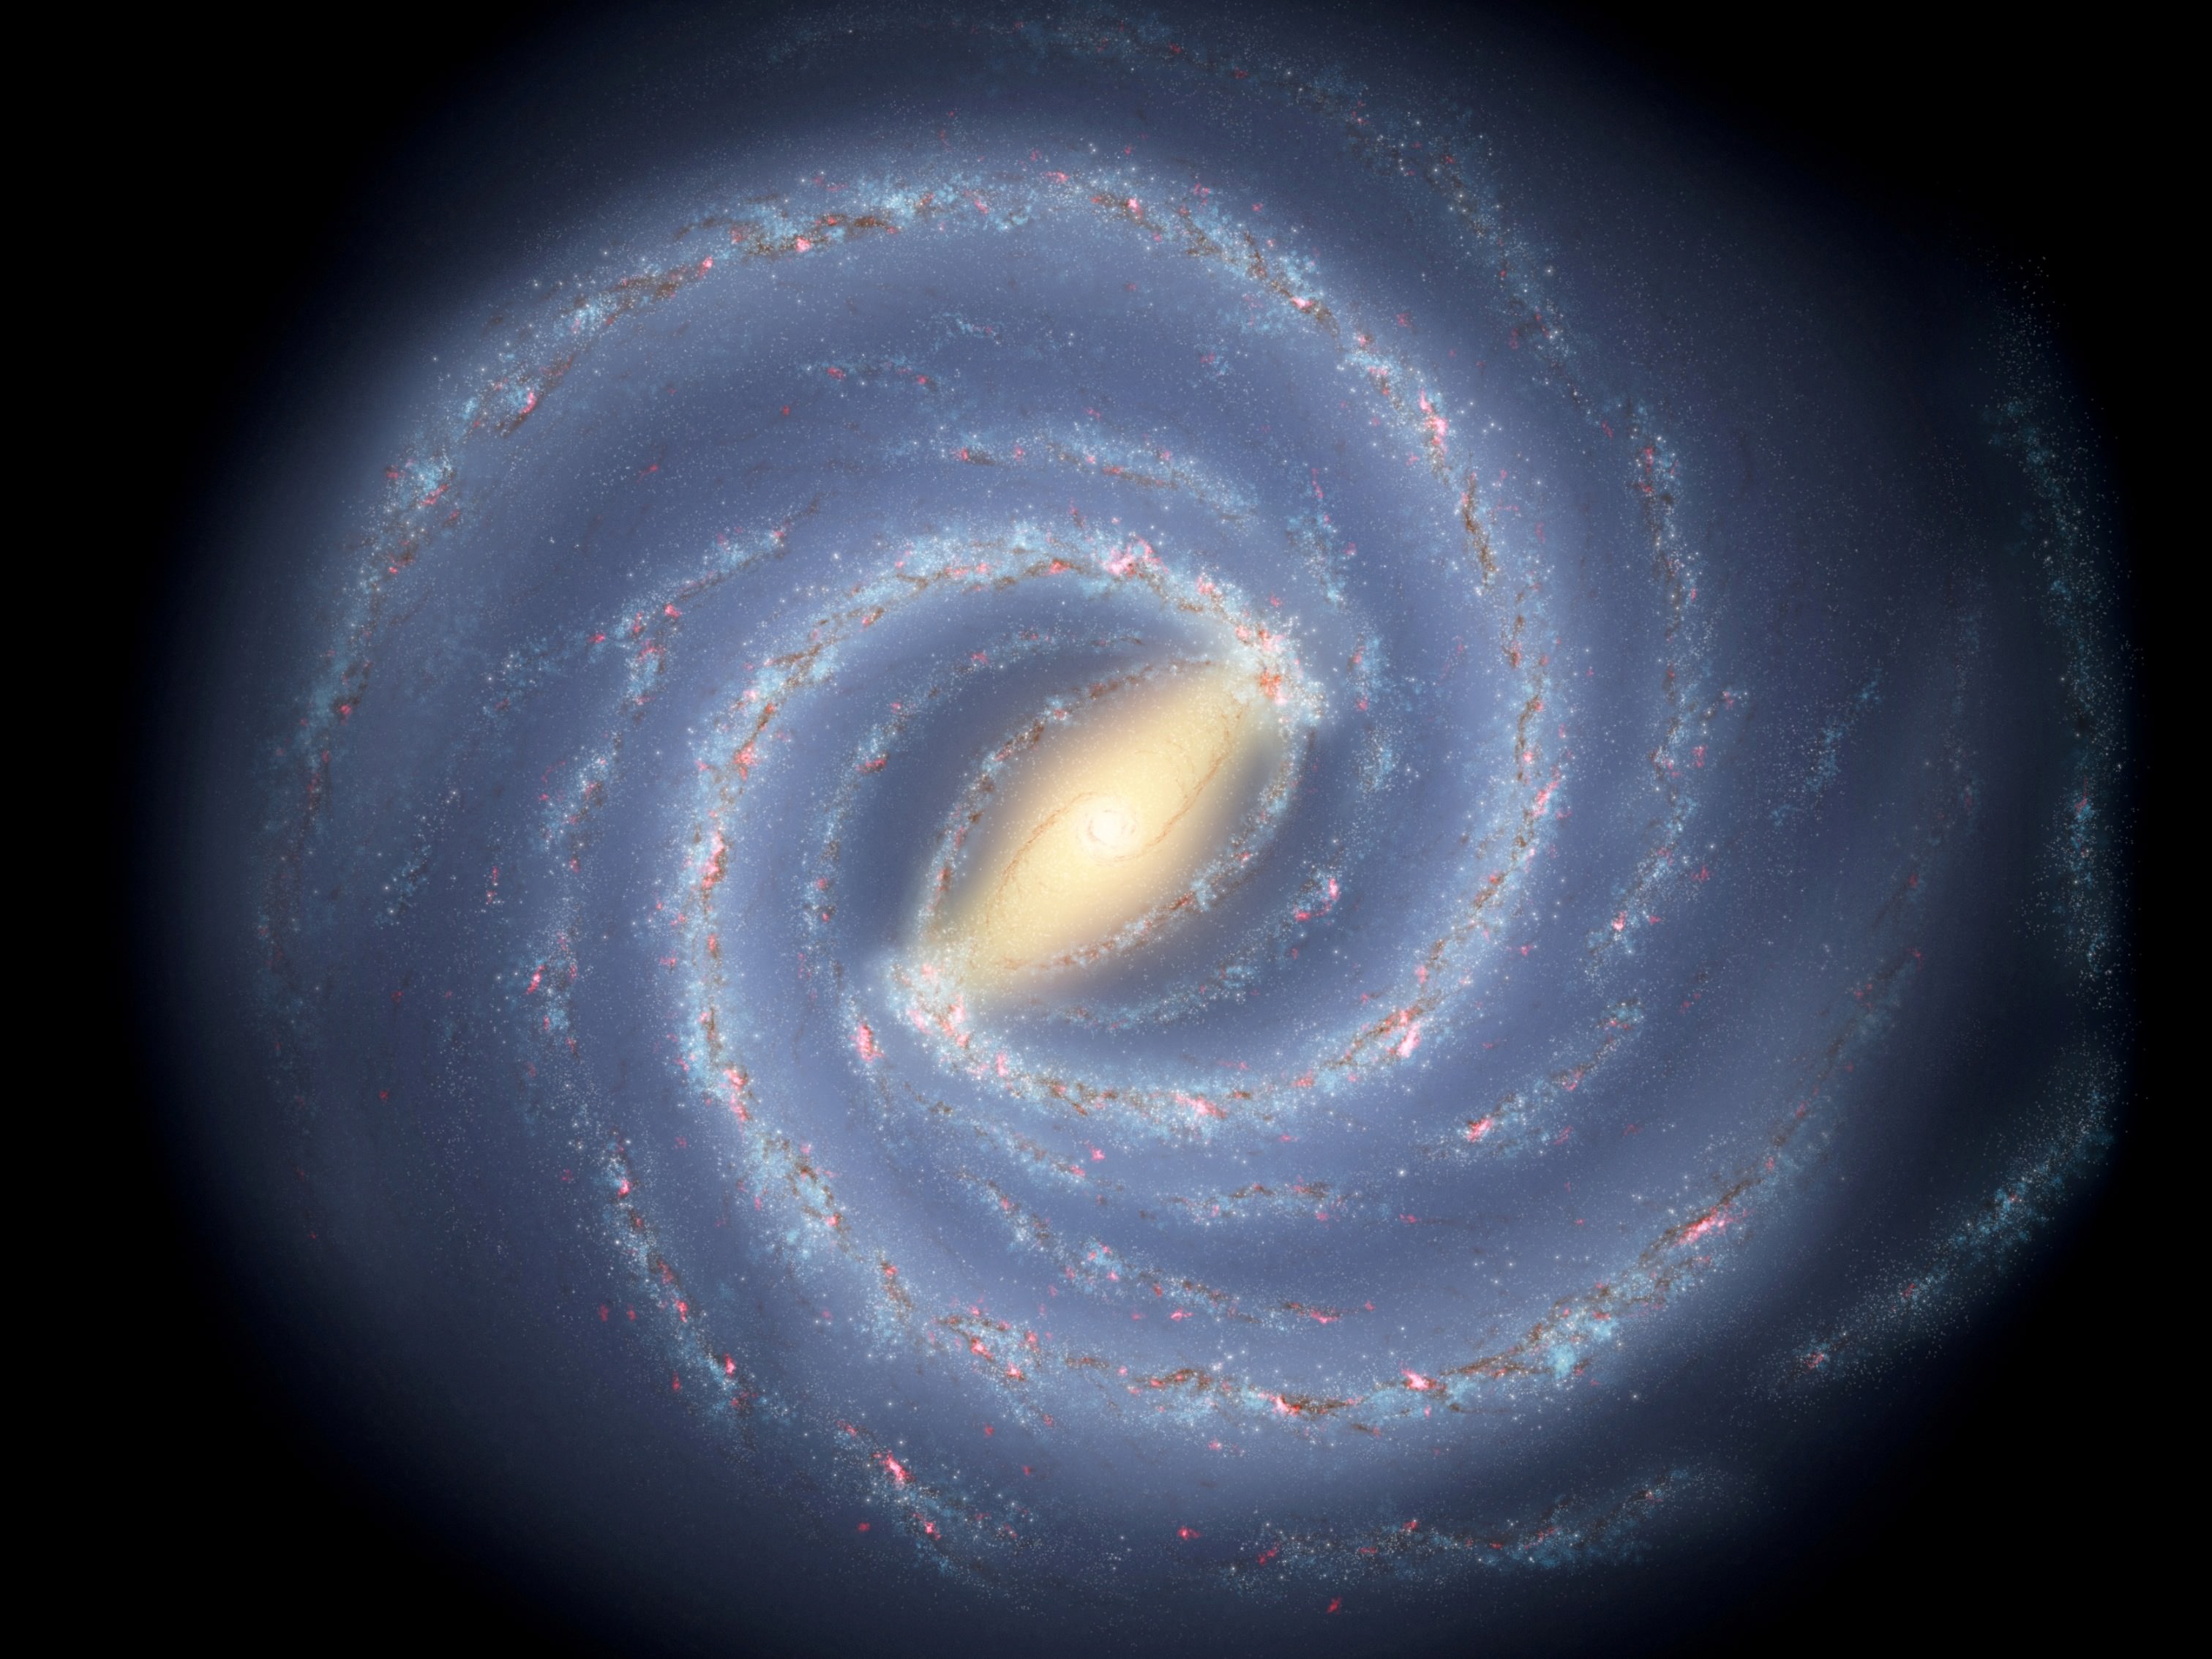 Our Milky Way Gets a Makeover